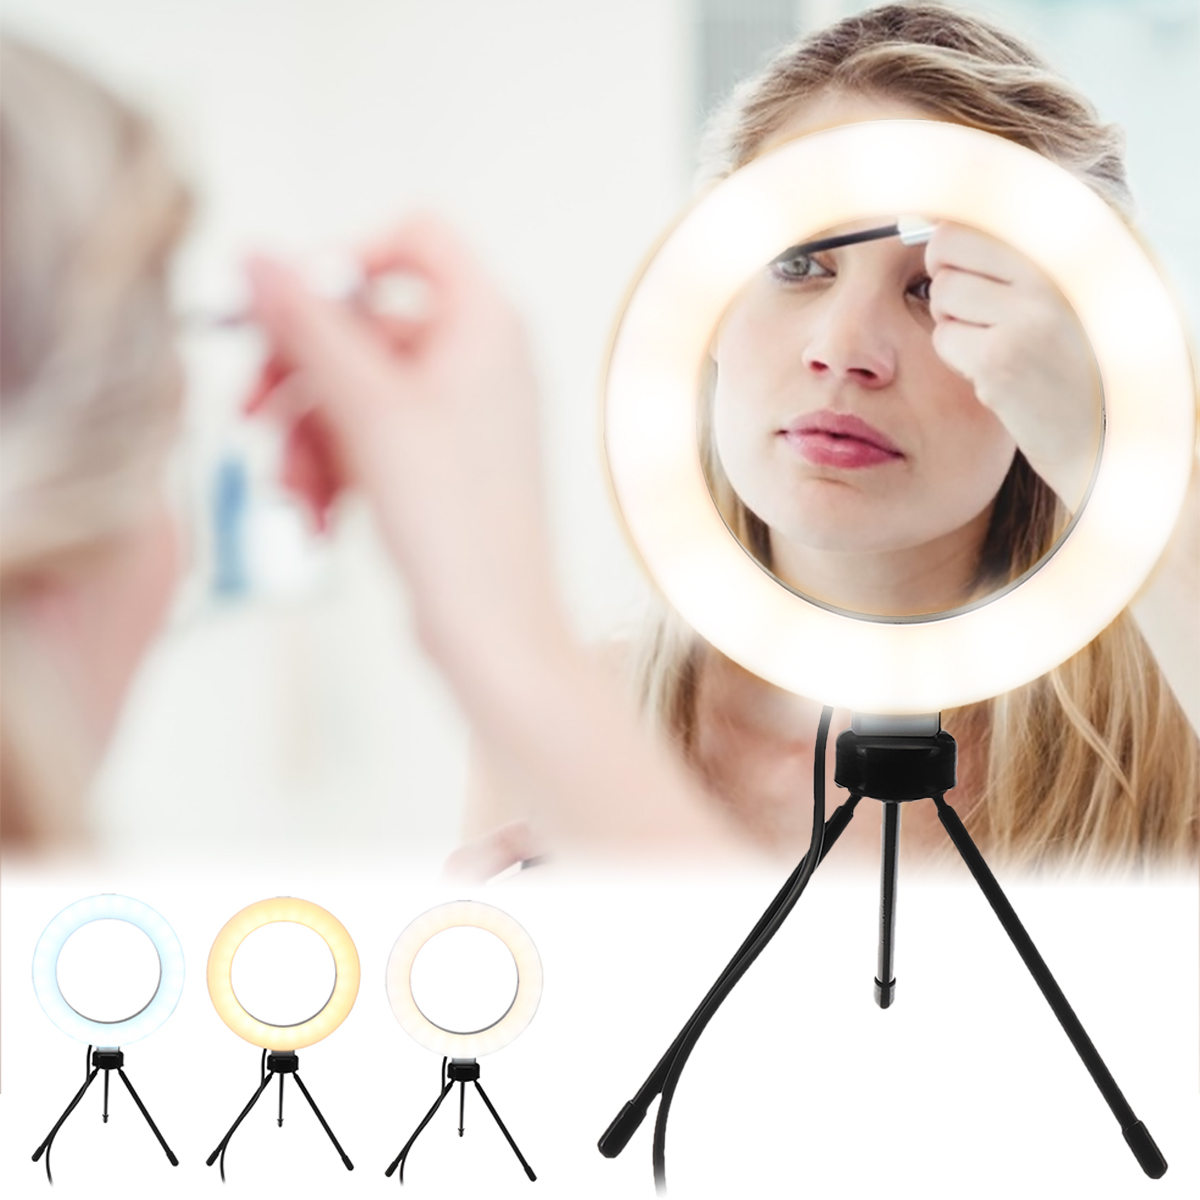 Photography-LED-Mirrors-Selfie-Ring-Light-260MM-Dimmable-Camera-Phone-Lamp-Fill-Light-with-Table-Tri-1632273-1